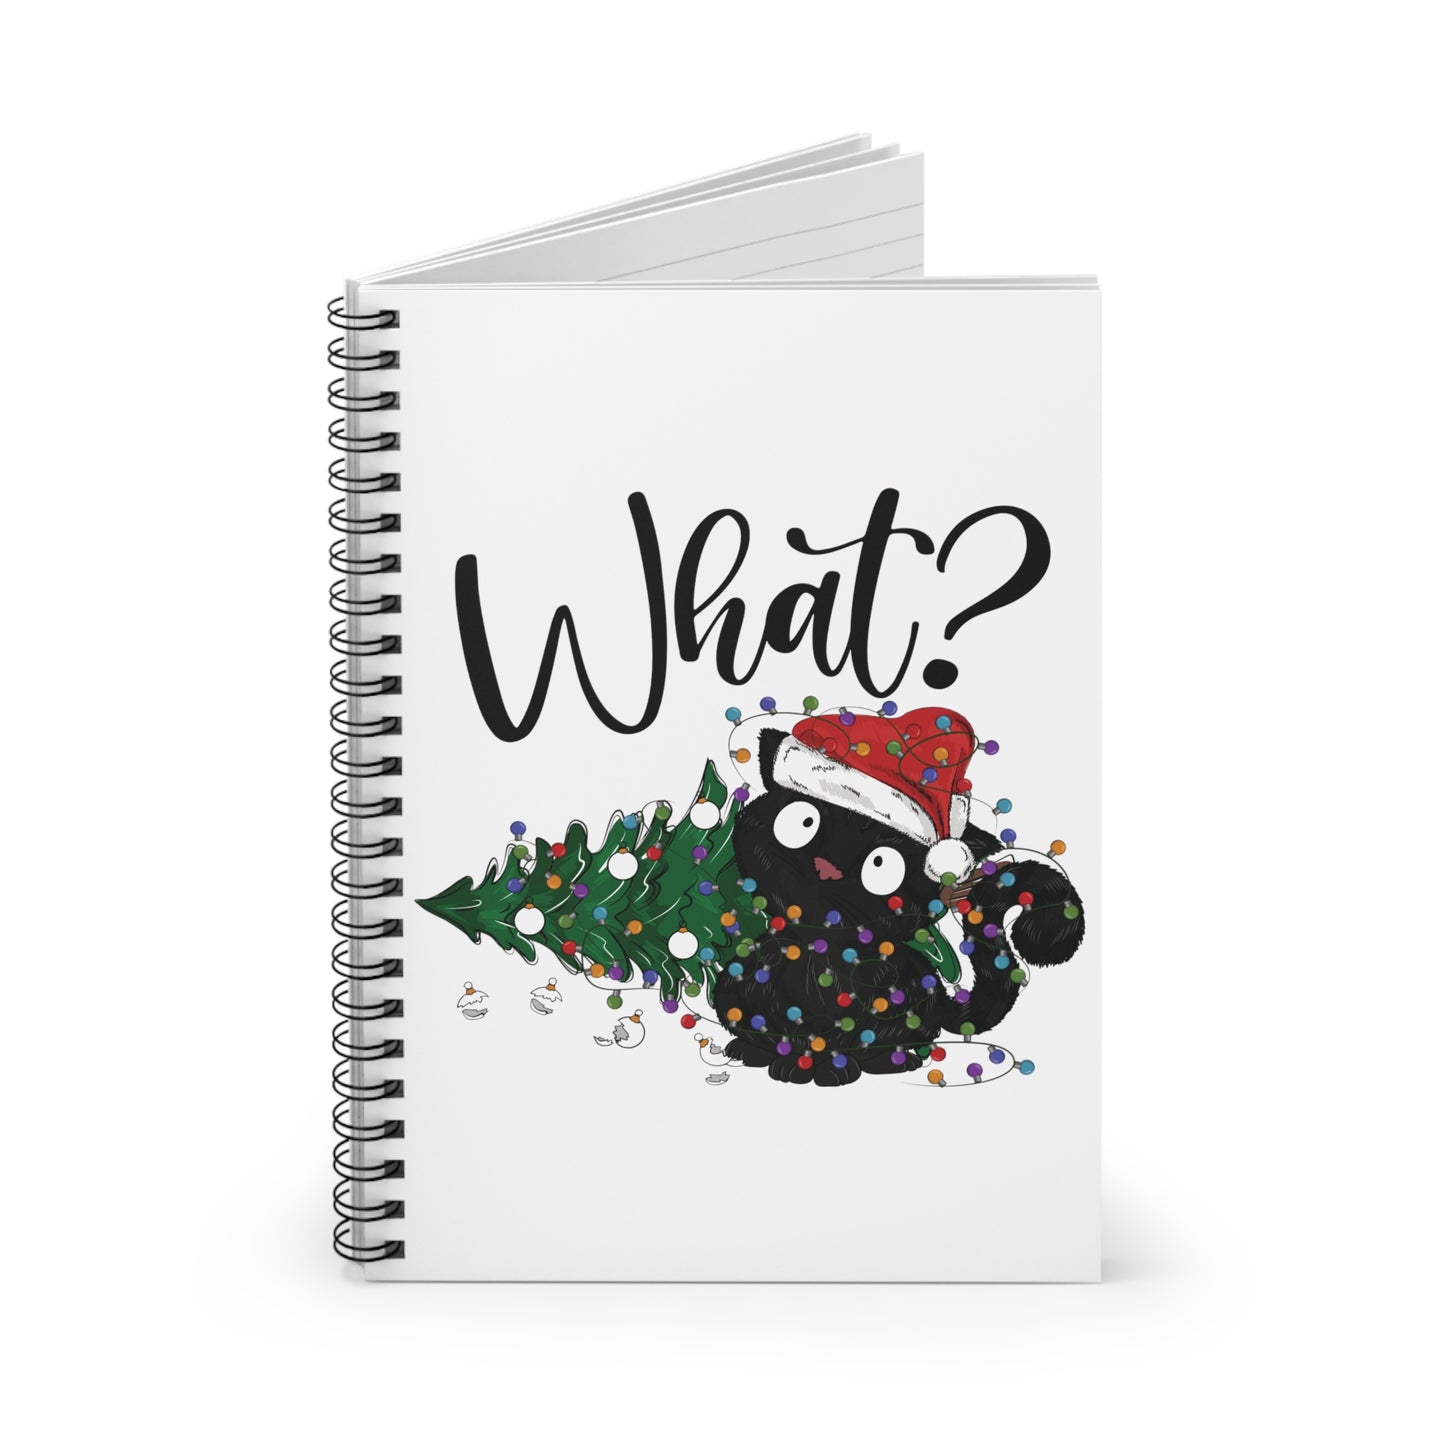 Christmas Cat: Spiral Notebook - Log Books - Journals - Diaries - and More Custom Printed by TheGlassyLass